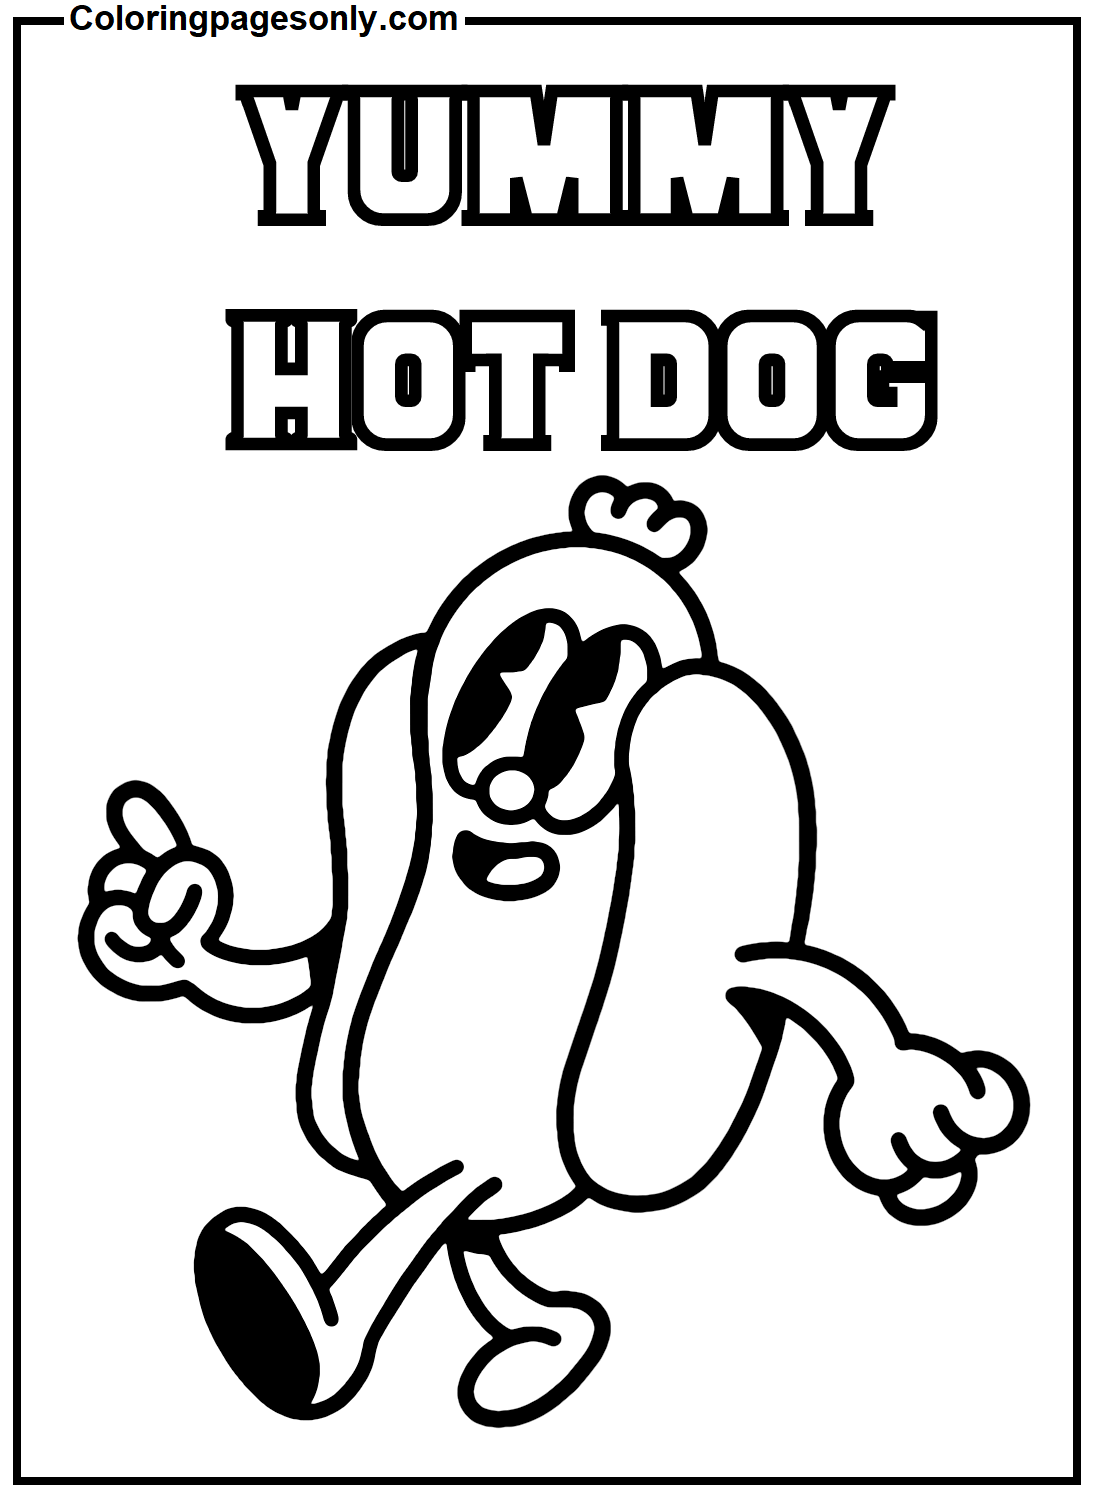 Yummy Hot Dog Coloring Pages